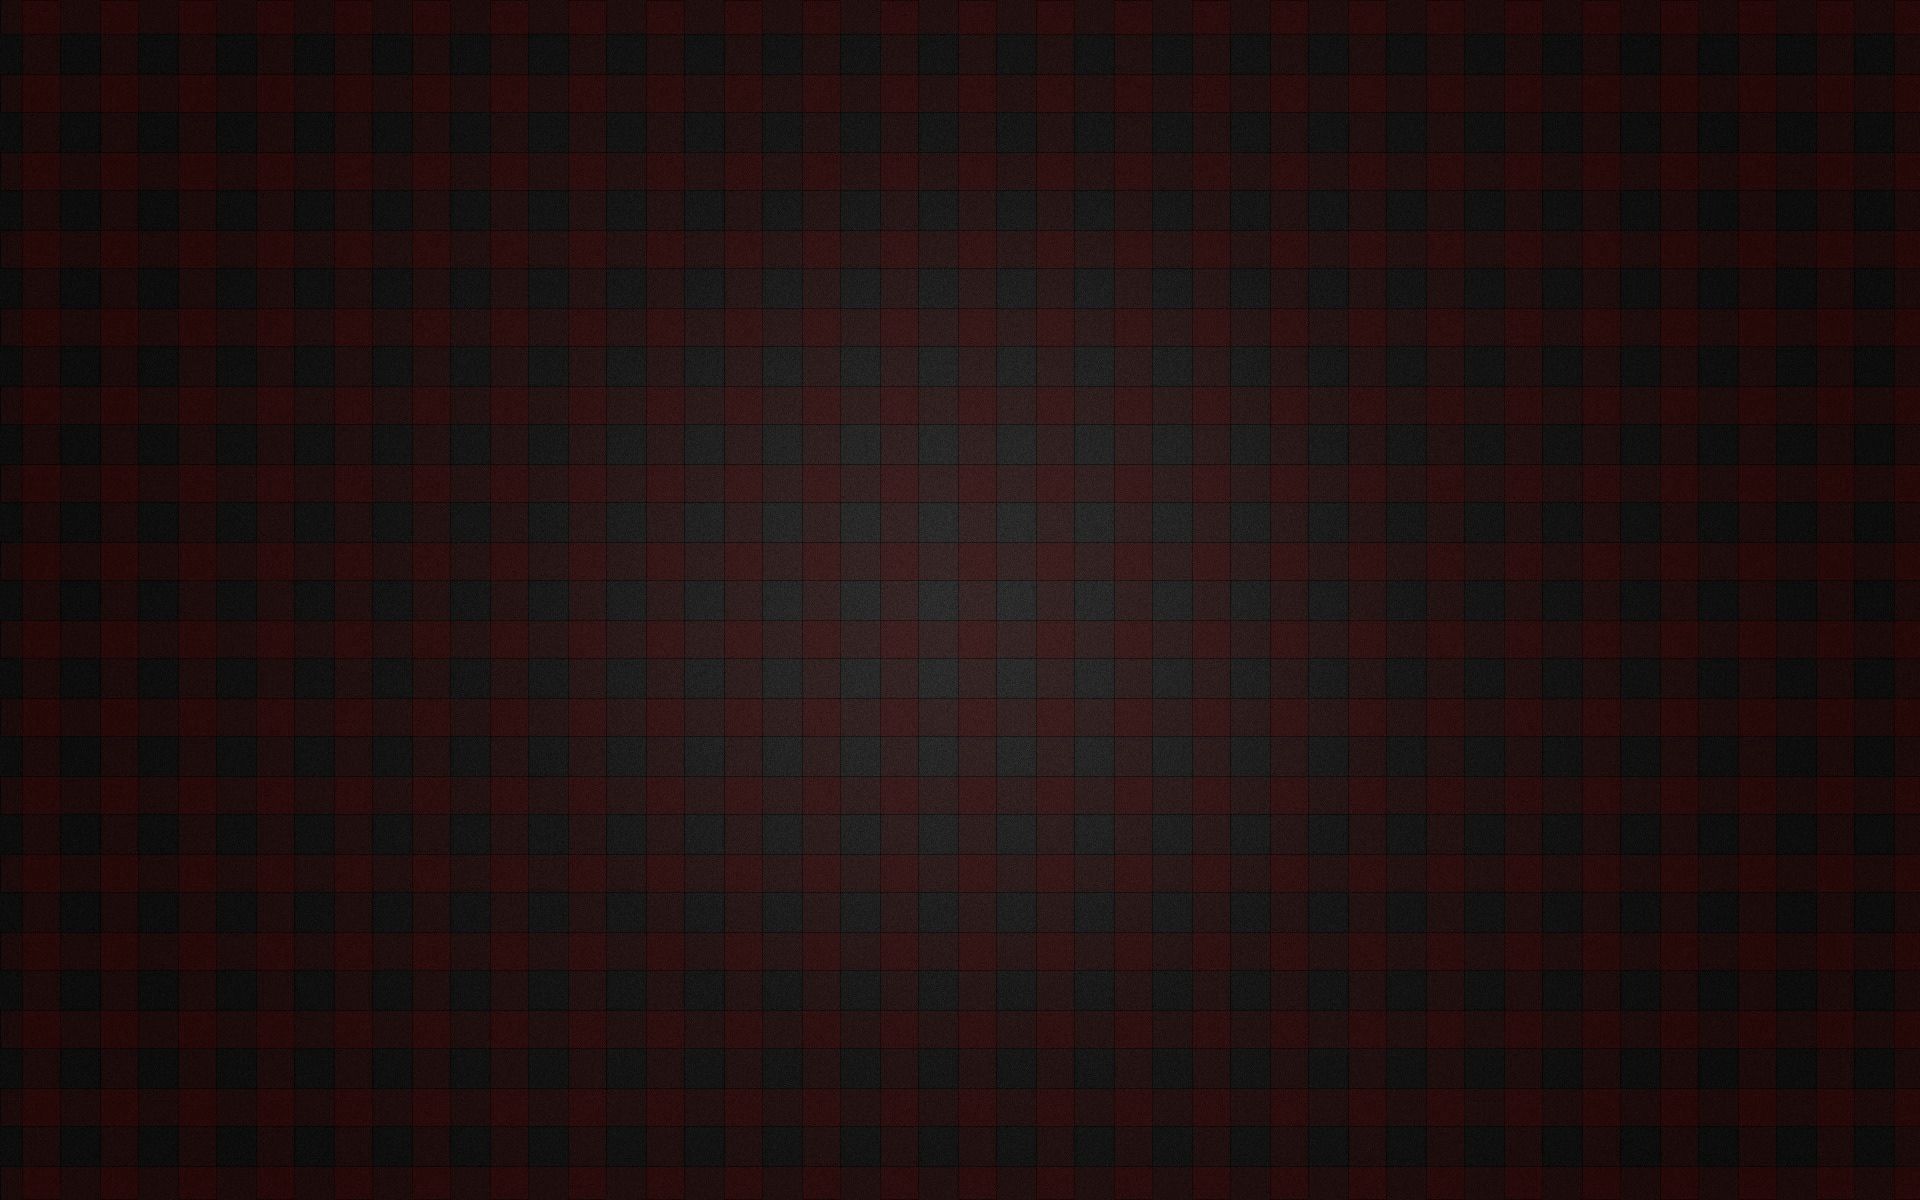 android textures, dark, background, texture, lines, grid